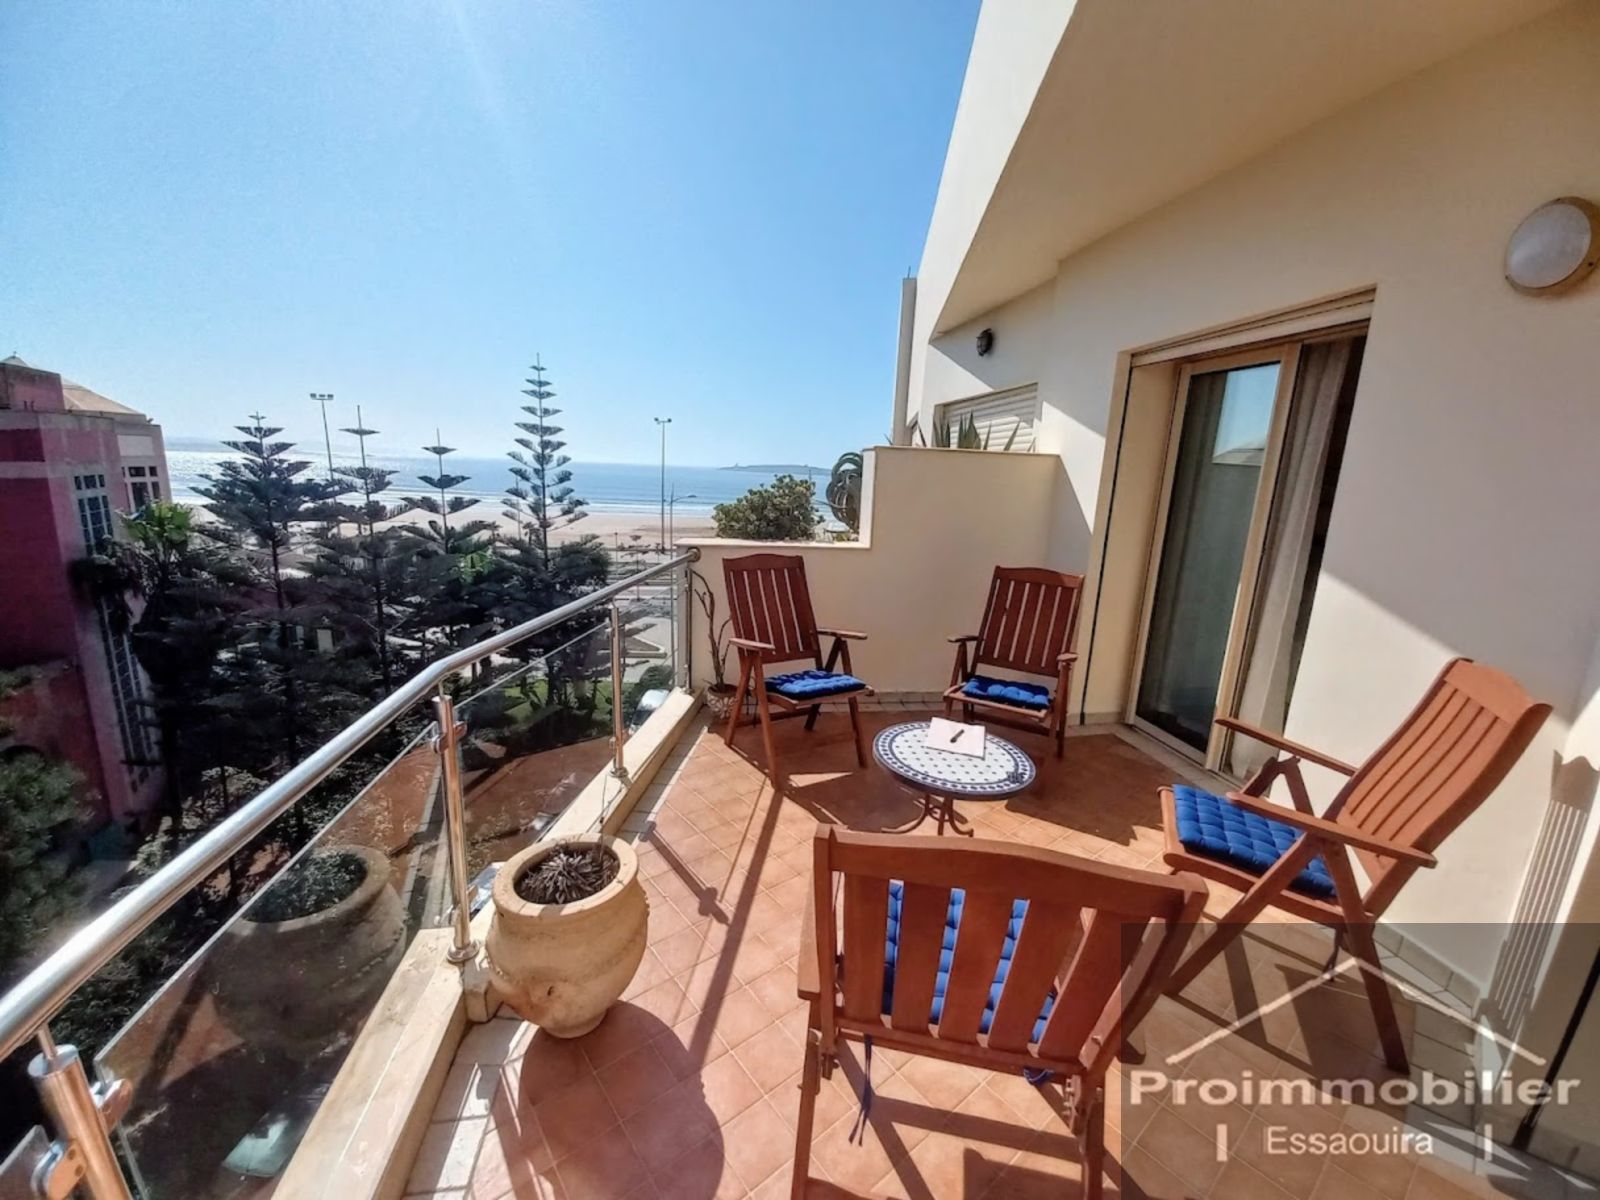 21-10-14-VA  Amazing appartment for sale in Essaouira of 72 m² with a sea view